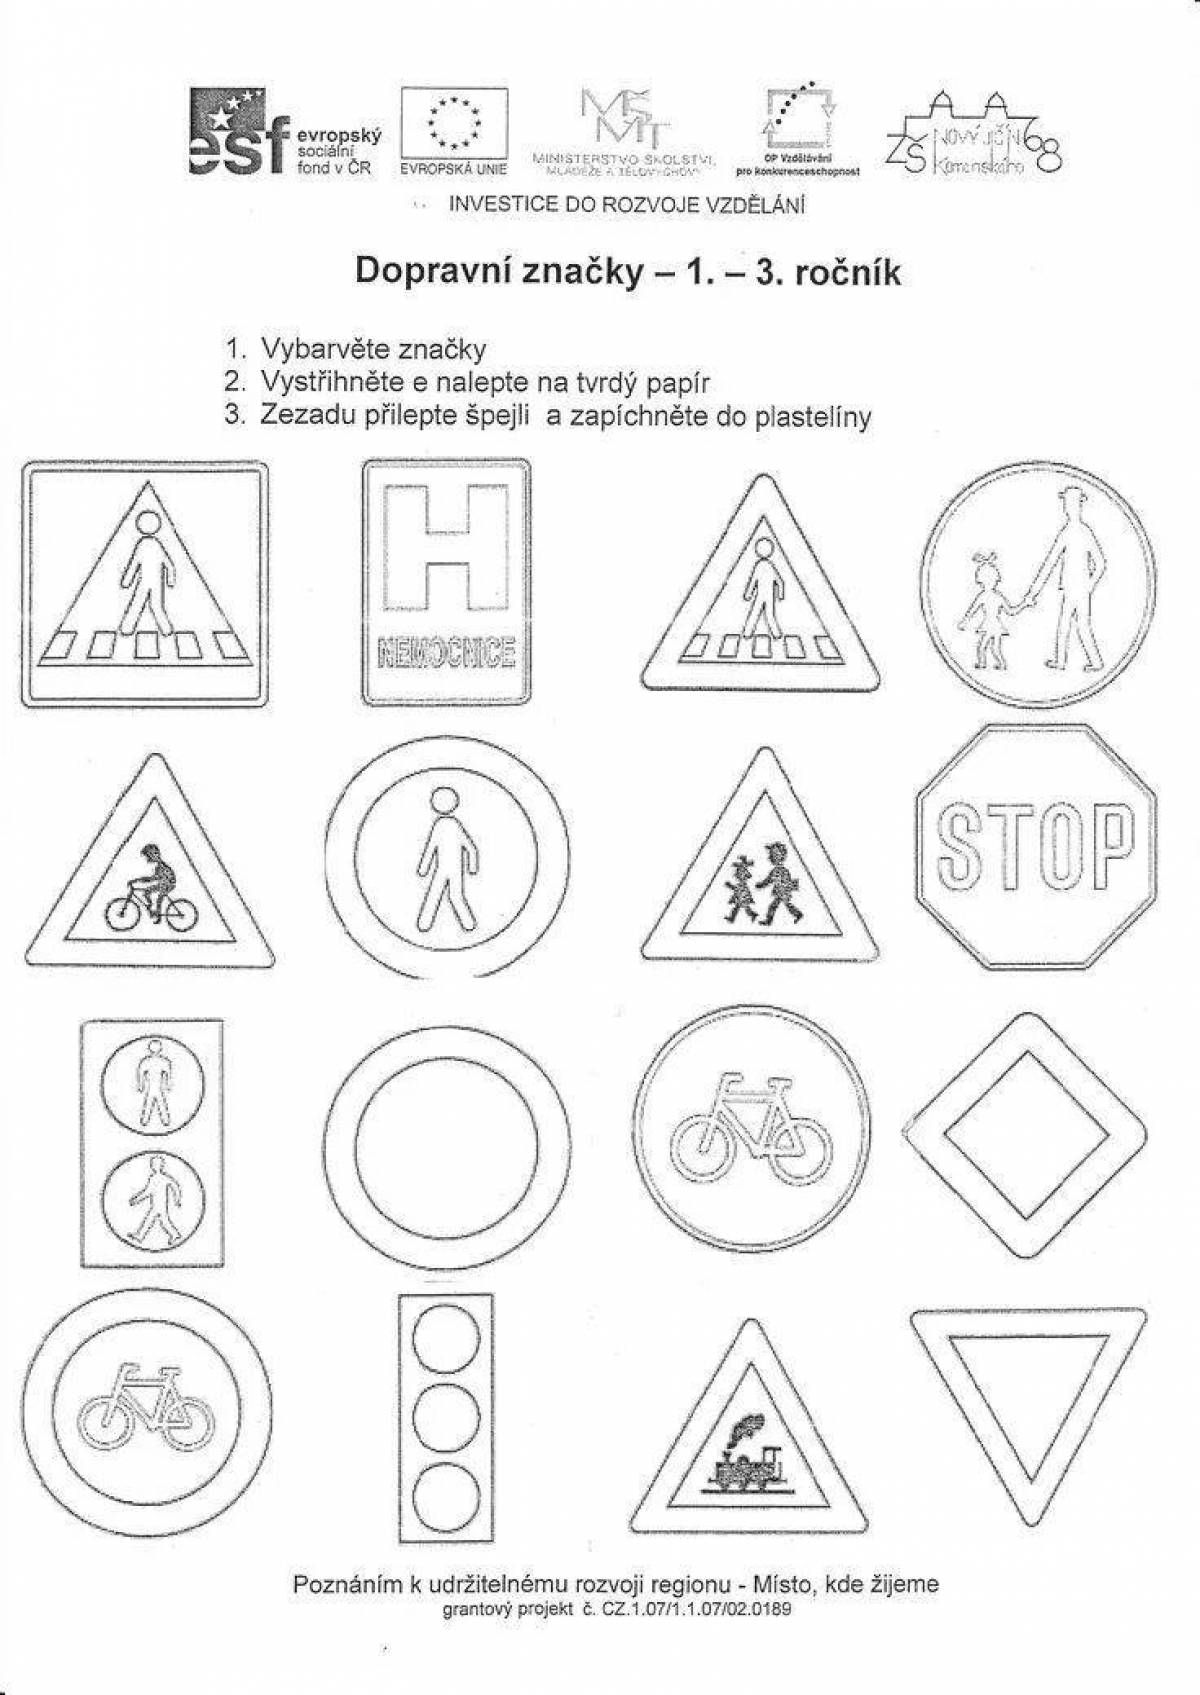 Creative Grade 2 traffic signs coloring page